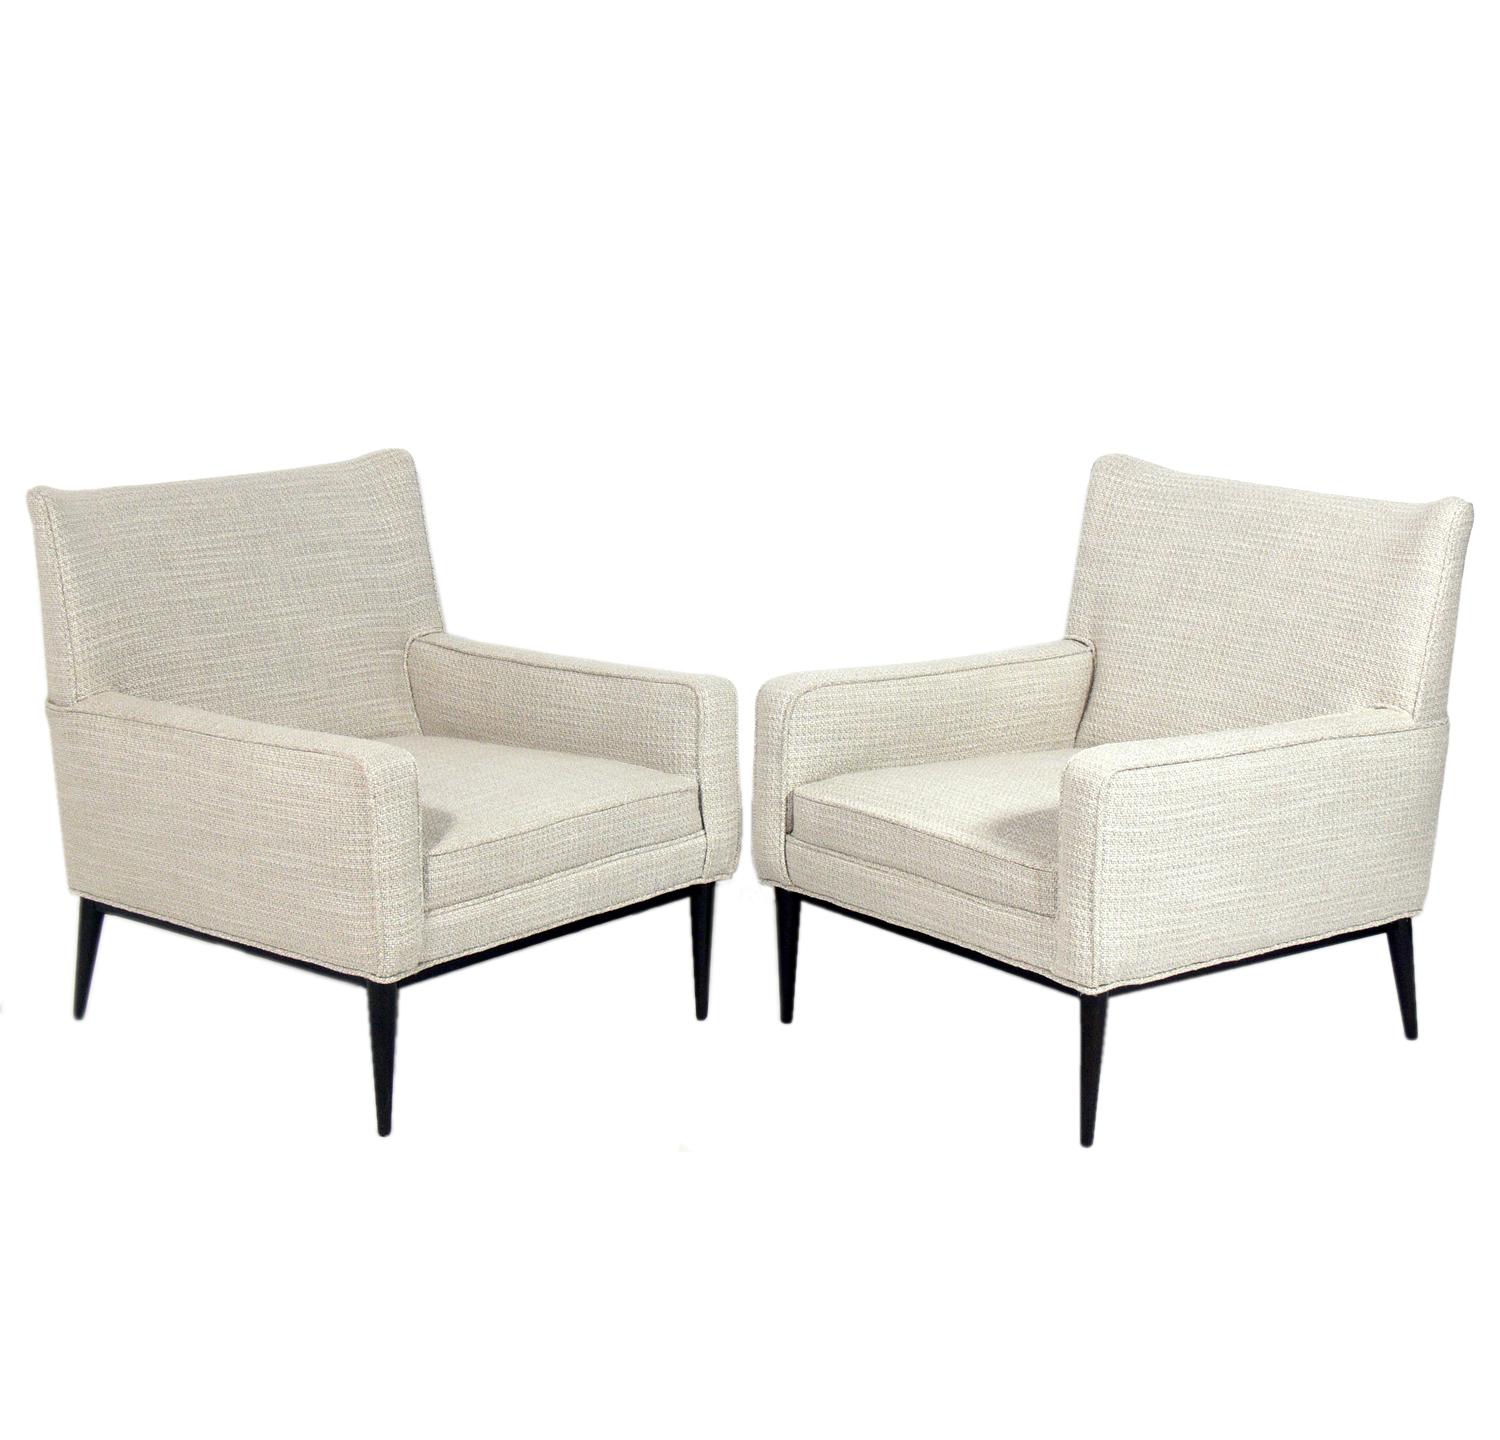 Pair of Curvaceous Lounge Chairs and Ottoman, designed by Paul McCobb for Directional, American, circa 1950s. They have been reupholstered in a sand and ivory colored textured fabric and the legs have been refinished in an ultra deep brown color.